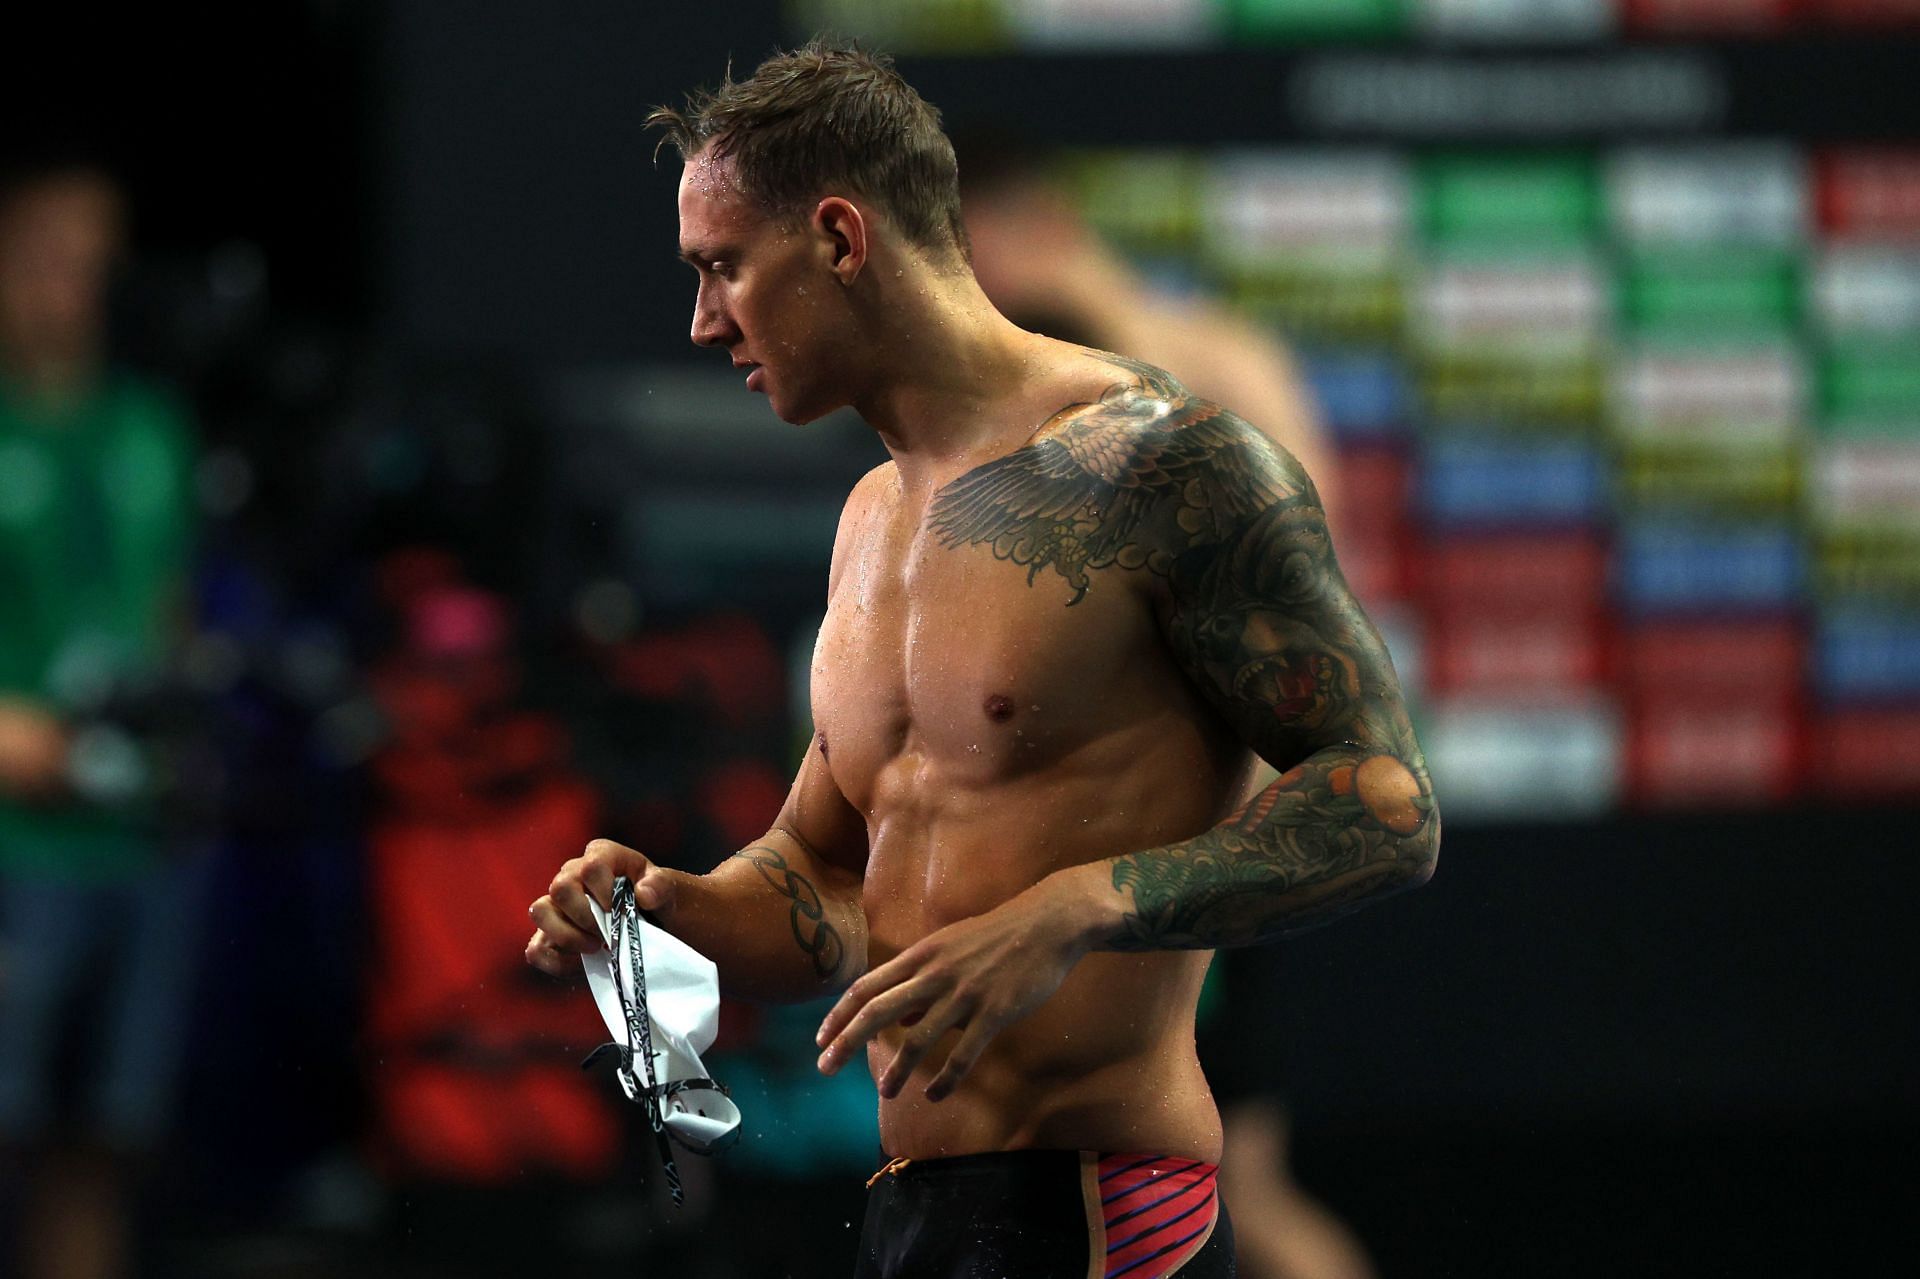 Caeleb Dressel's workout and training schedule